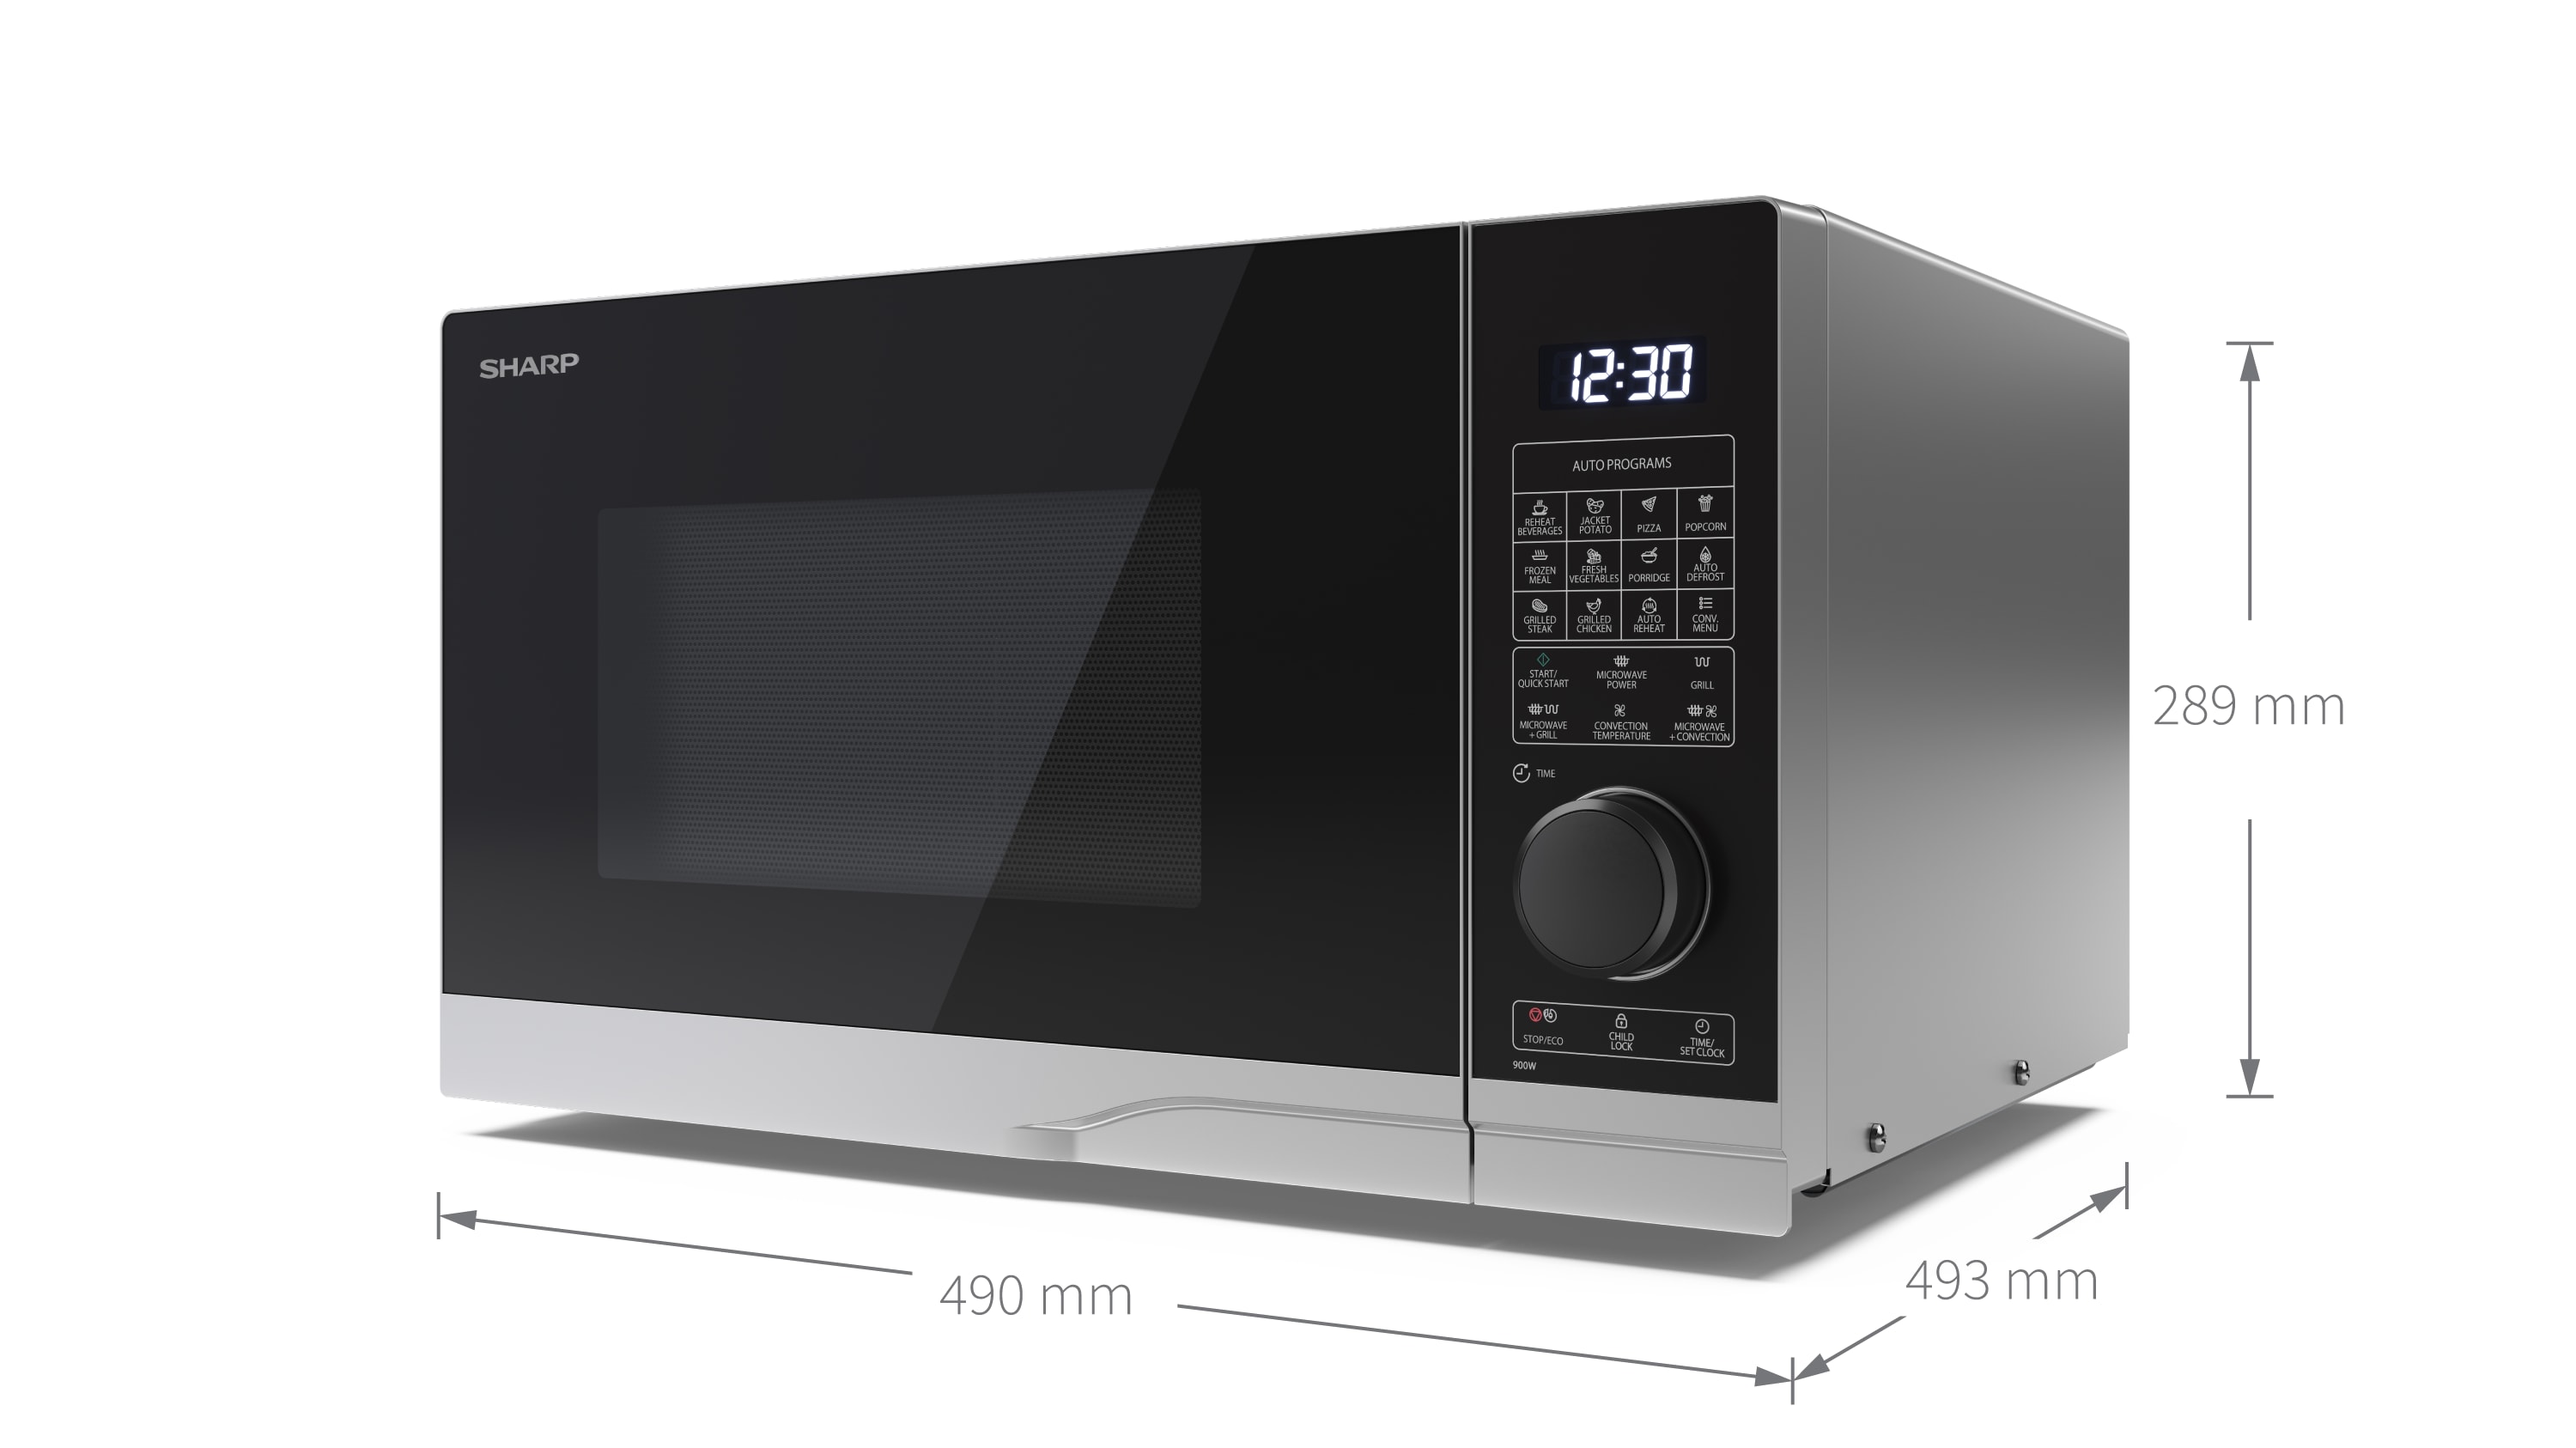 25 Litre Microwave Oven with Grill and Convection - YC-PC254AE-S